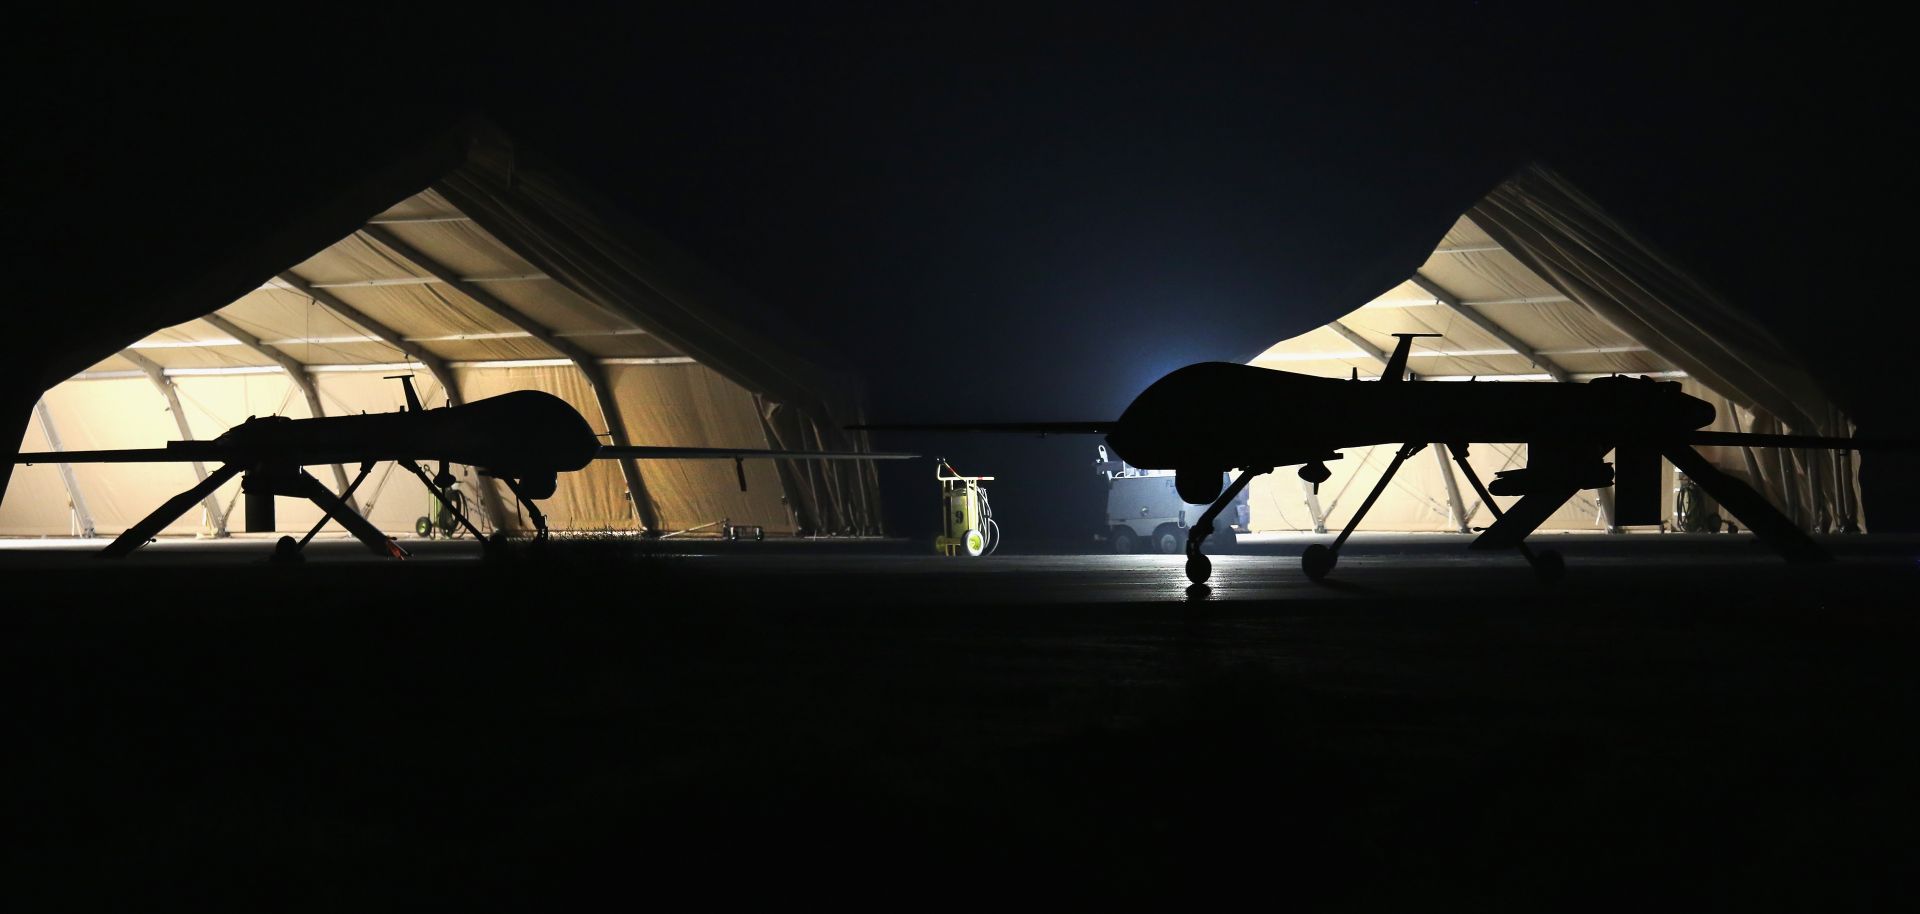  A U.S. Air Force MQ-1B Predator unmanned aerial vehicle returns from a mission to an air base in the Persian Gulf region on Jan. 7, 2016.